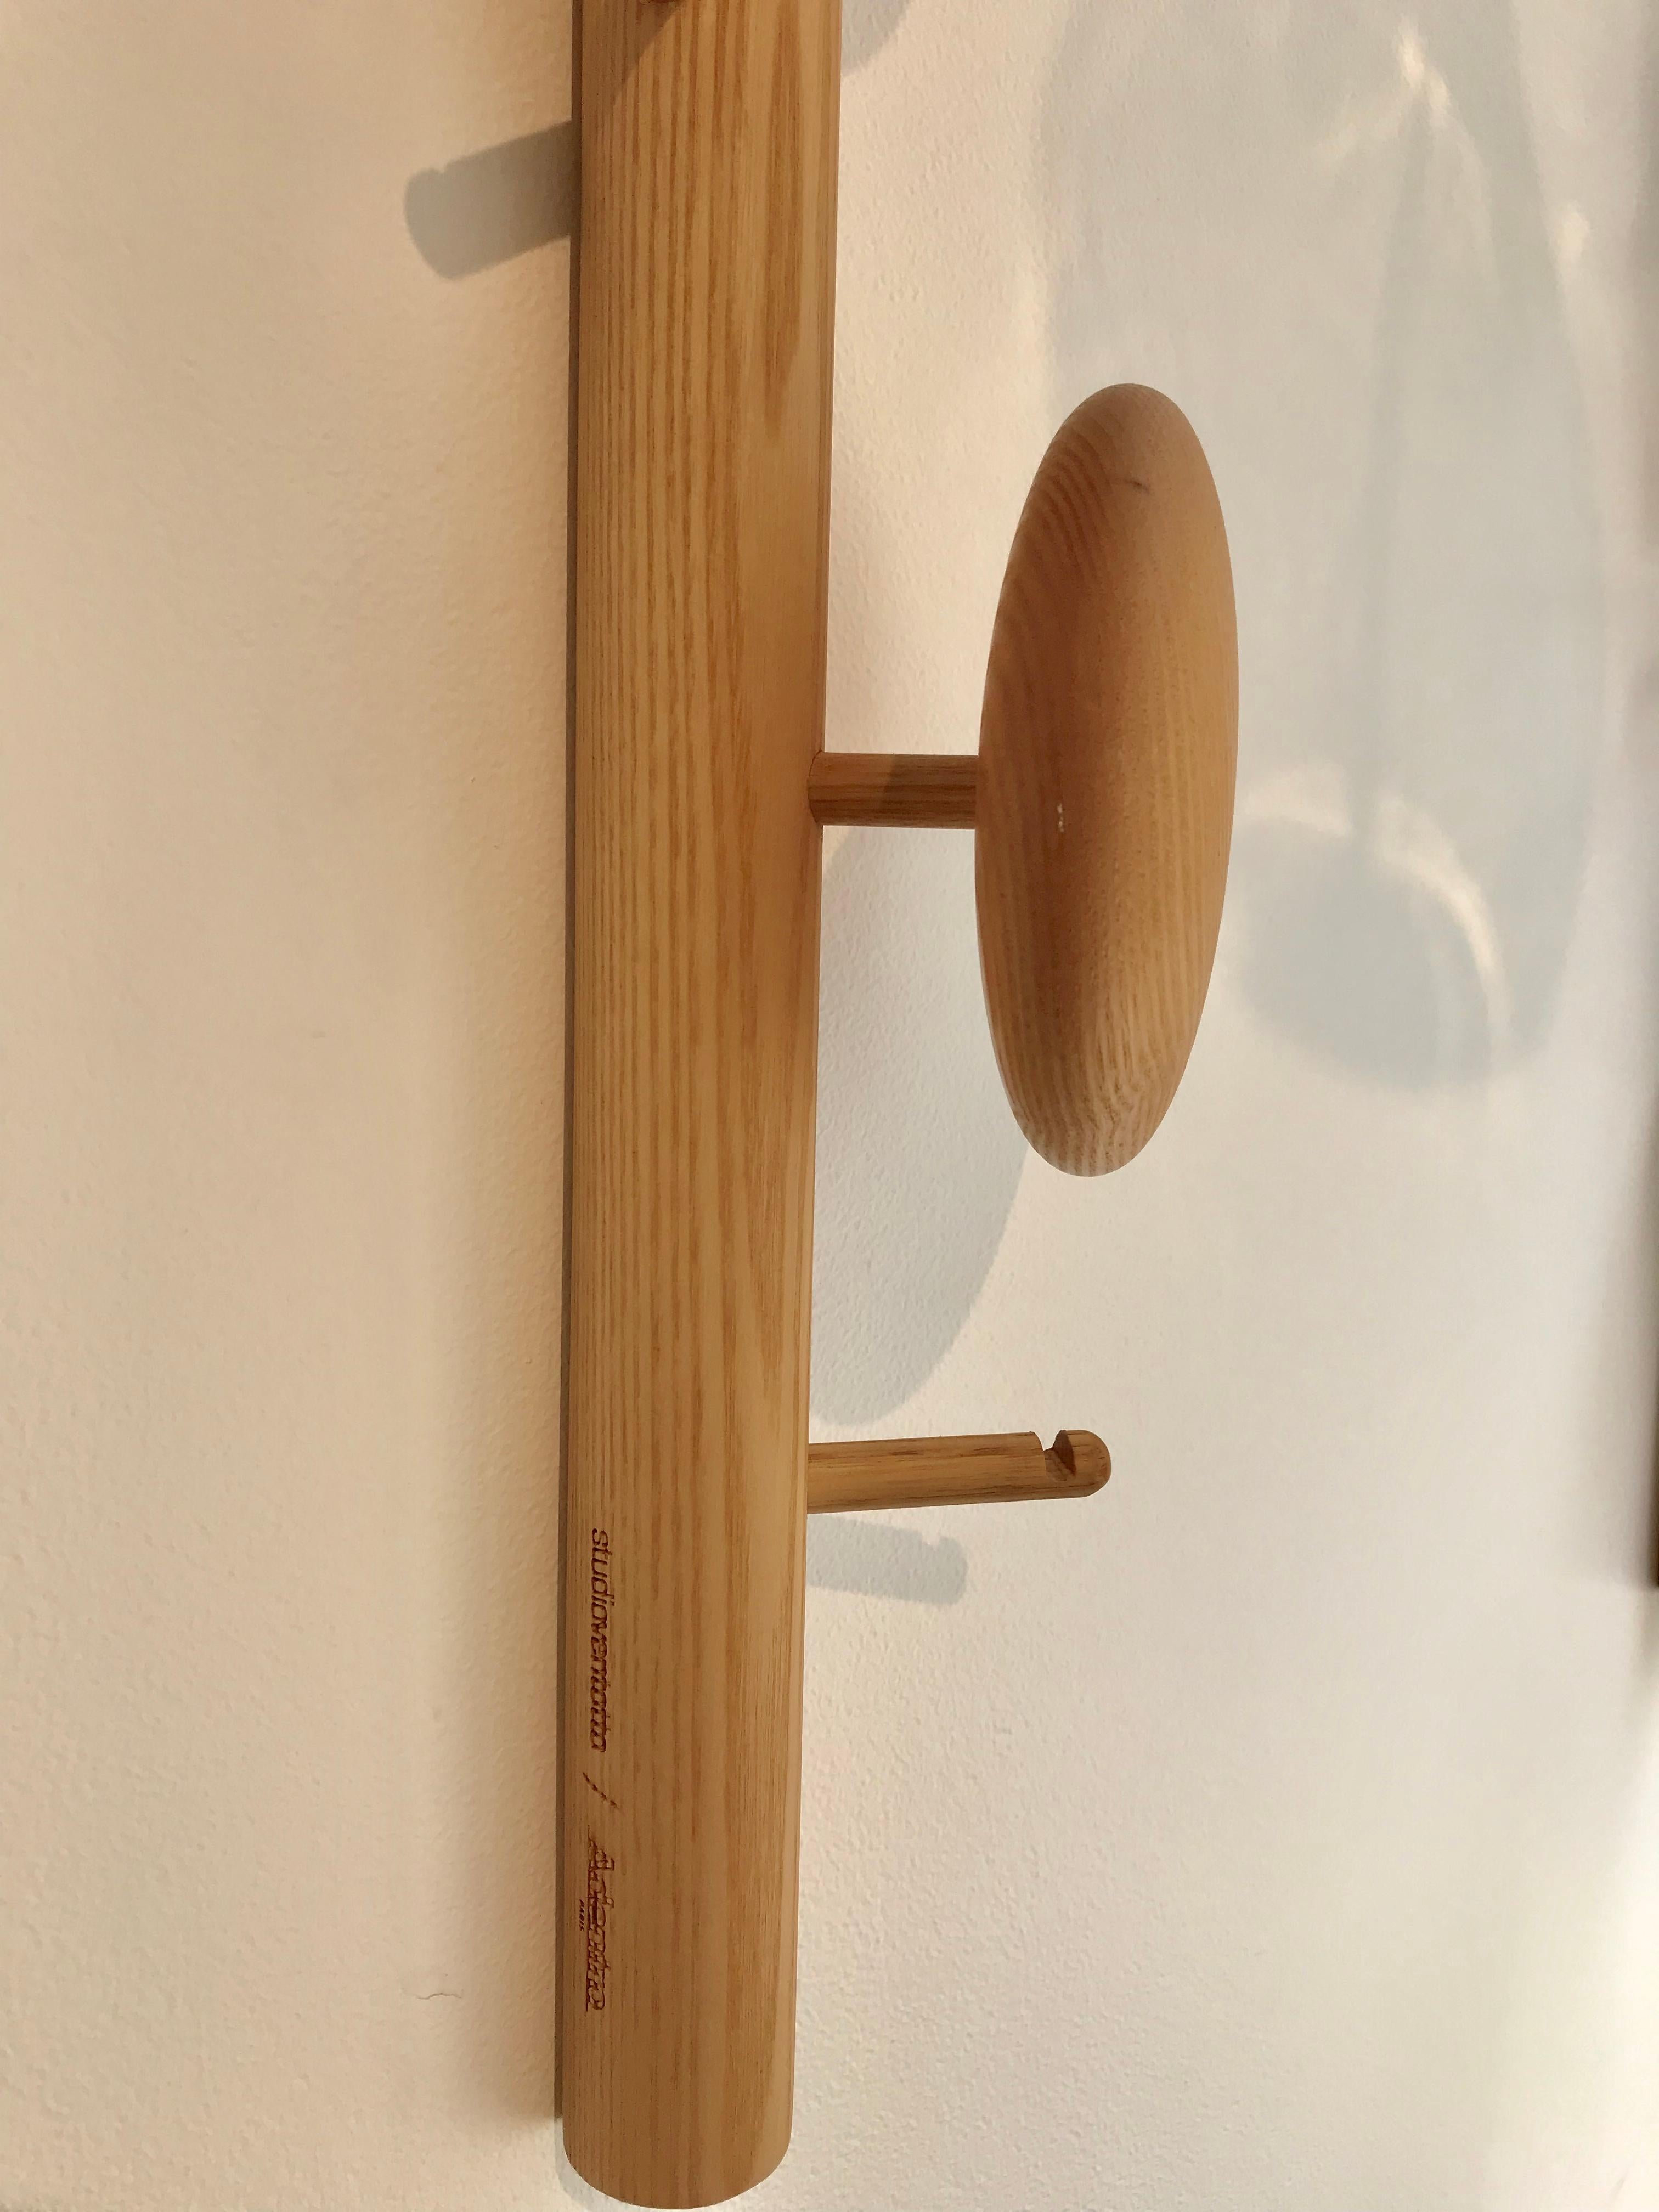 Turned Johnny Stecchino Jr Coat rack Natural by Adentro For Sale